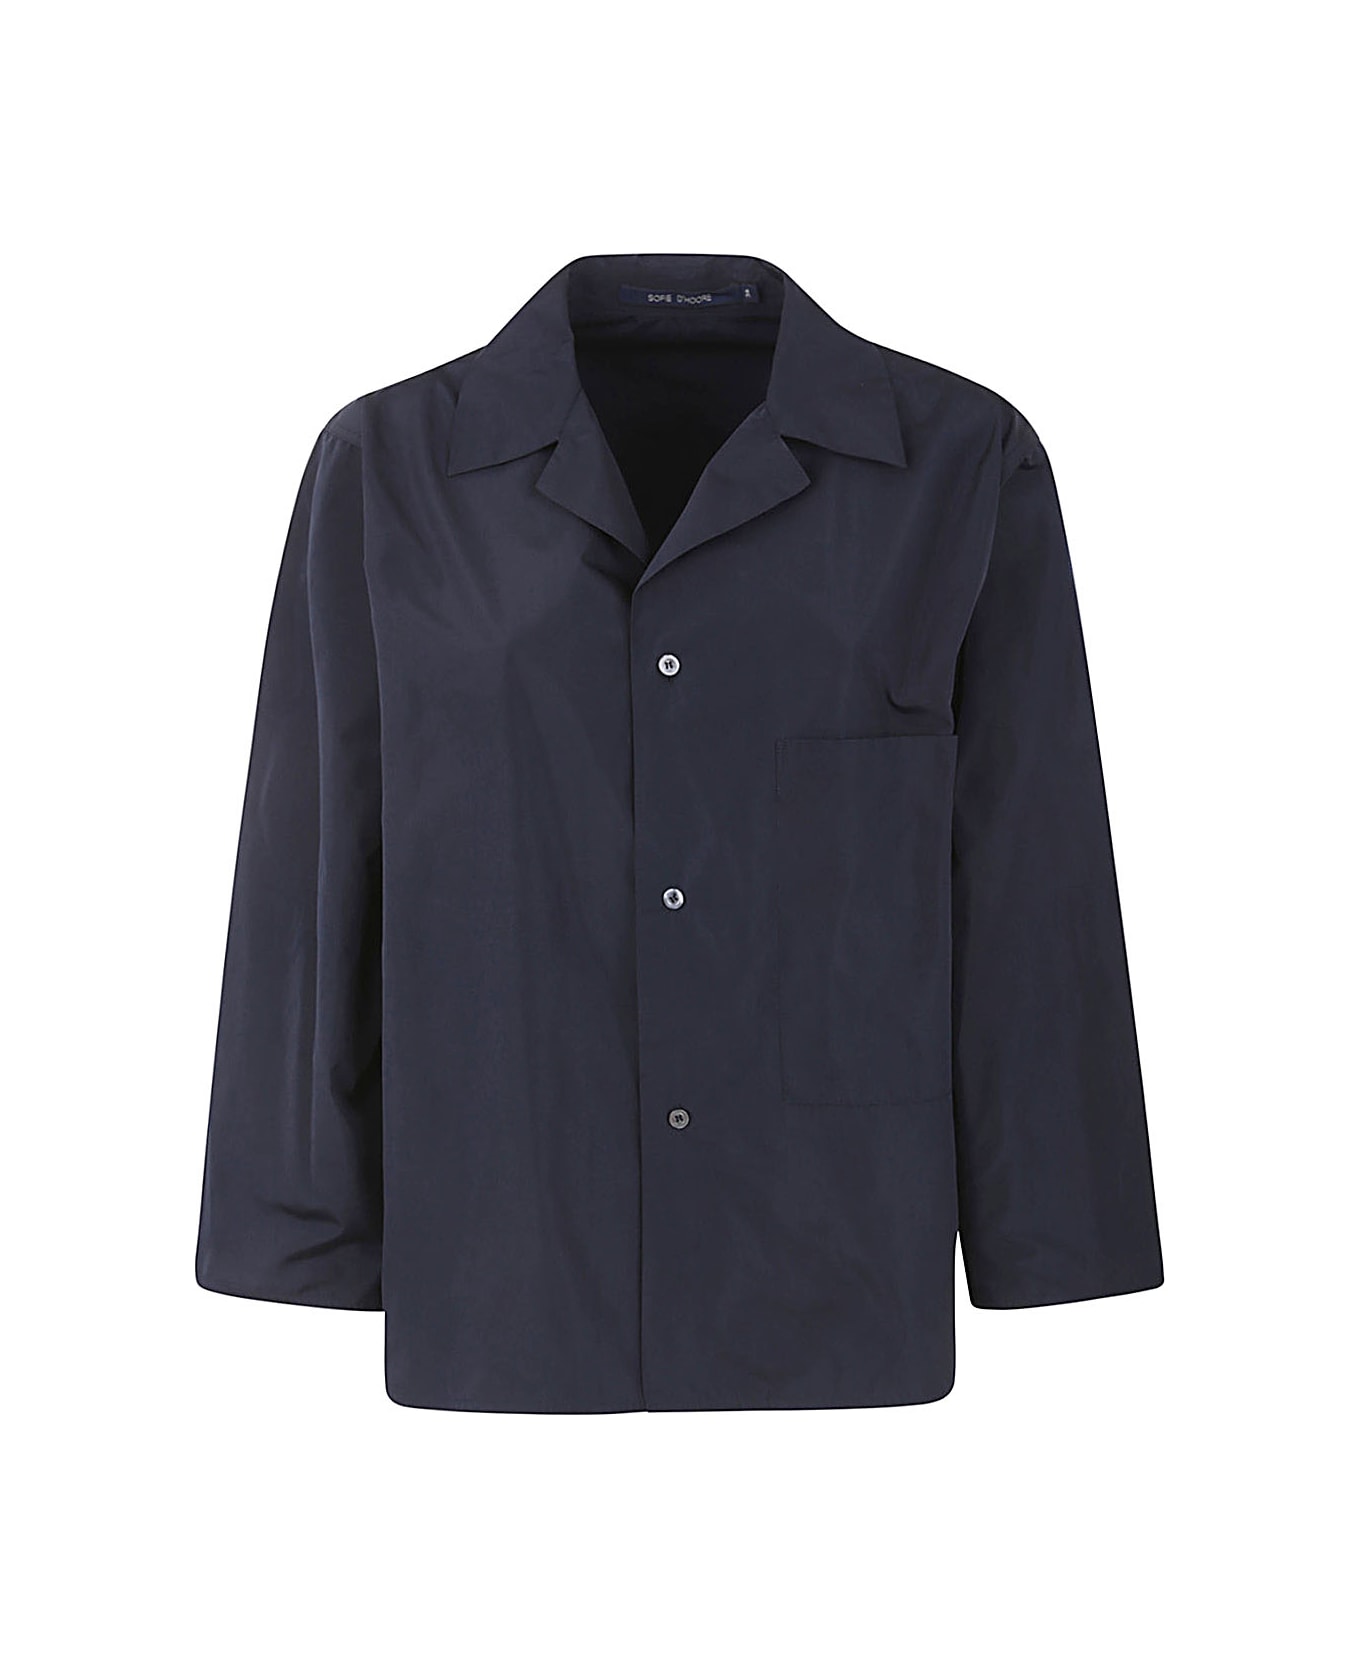 Sofie d'Hoore Long Sleeve Shirt With Front Applied Pocket - Midnight シャツ